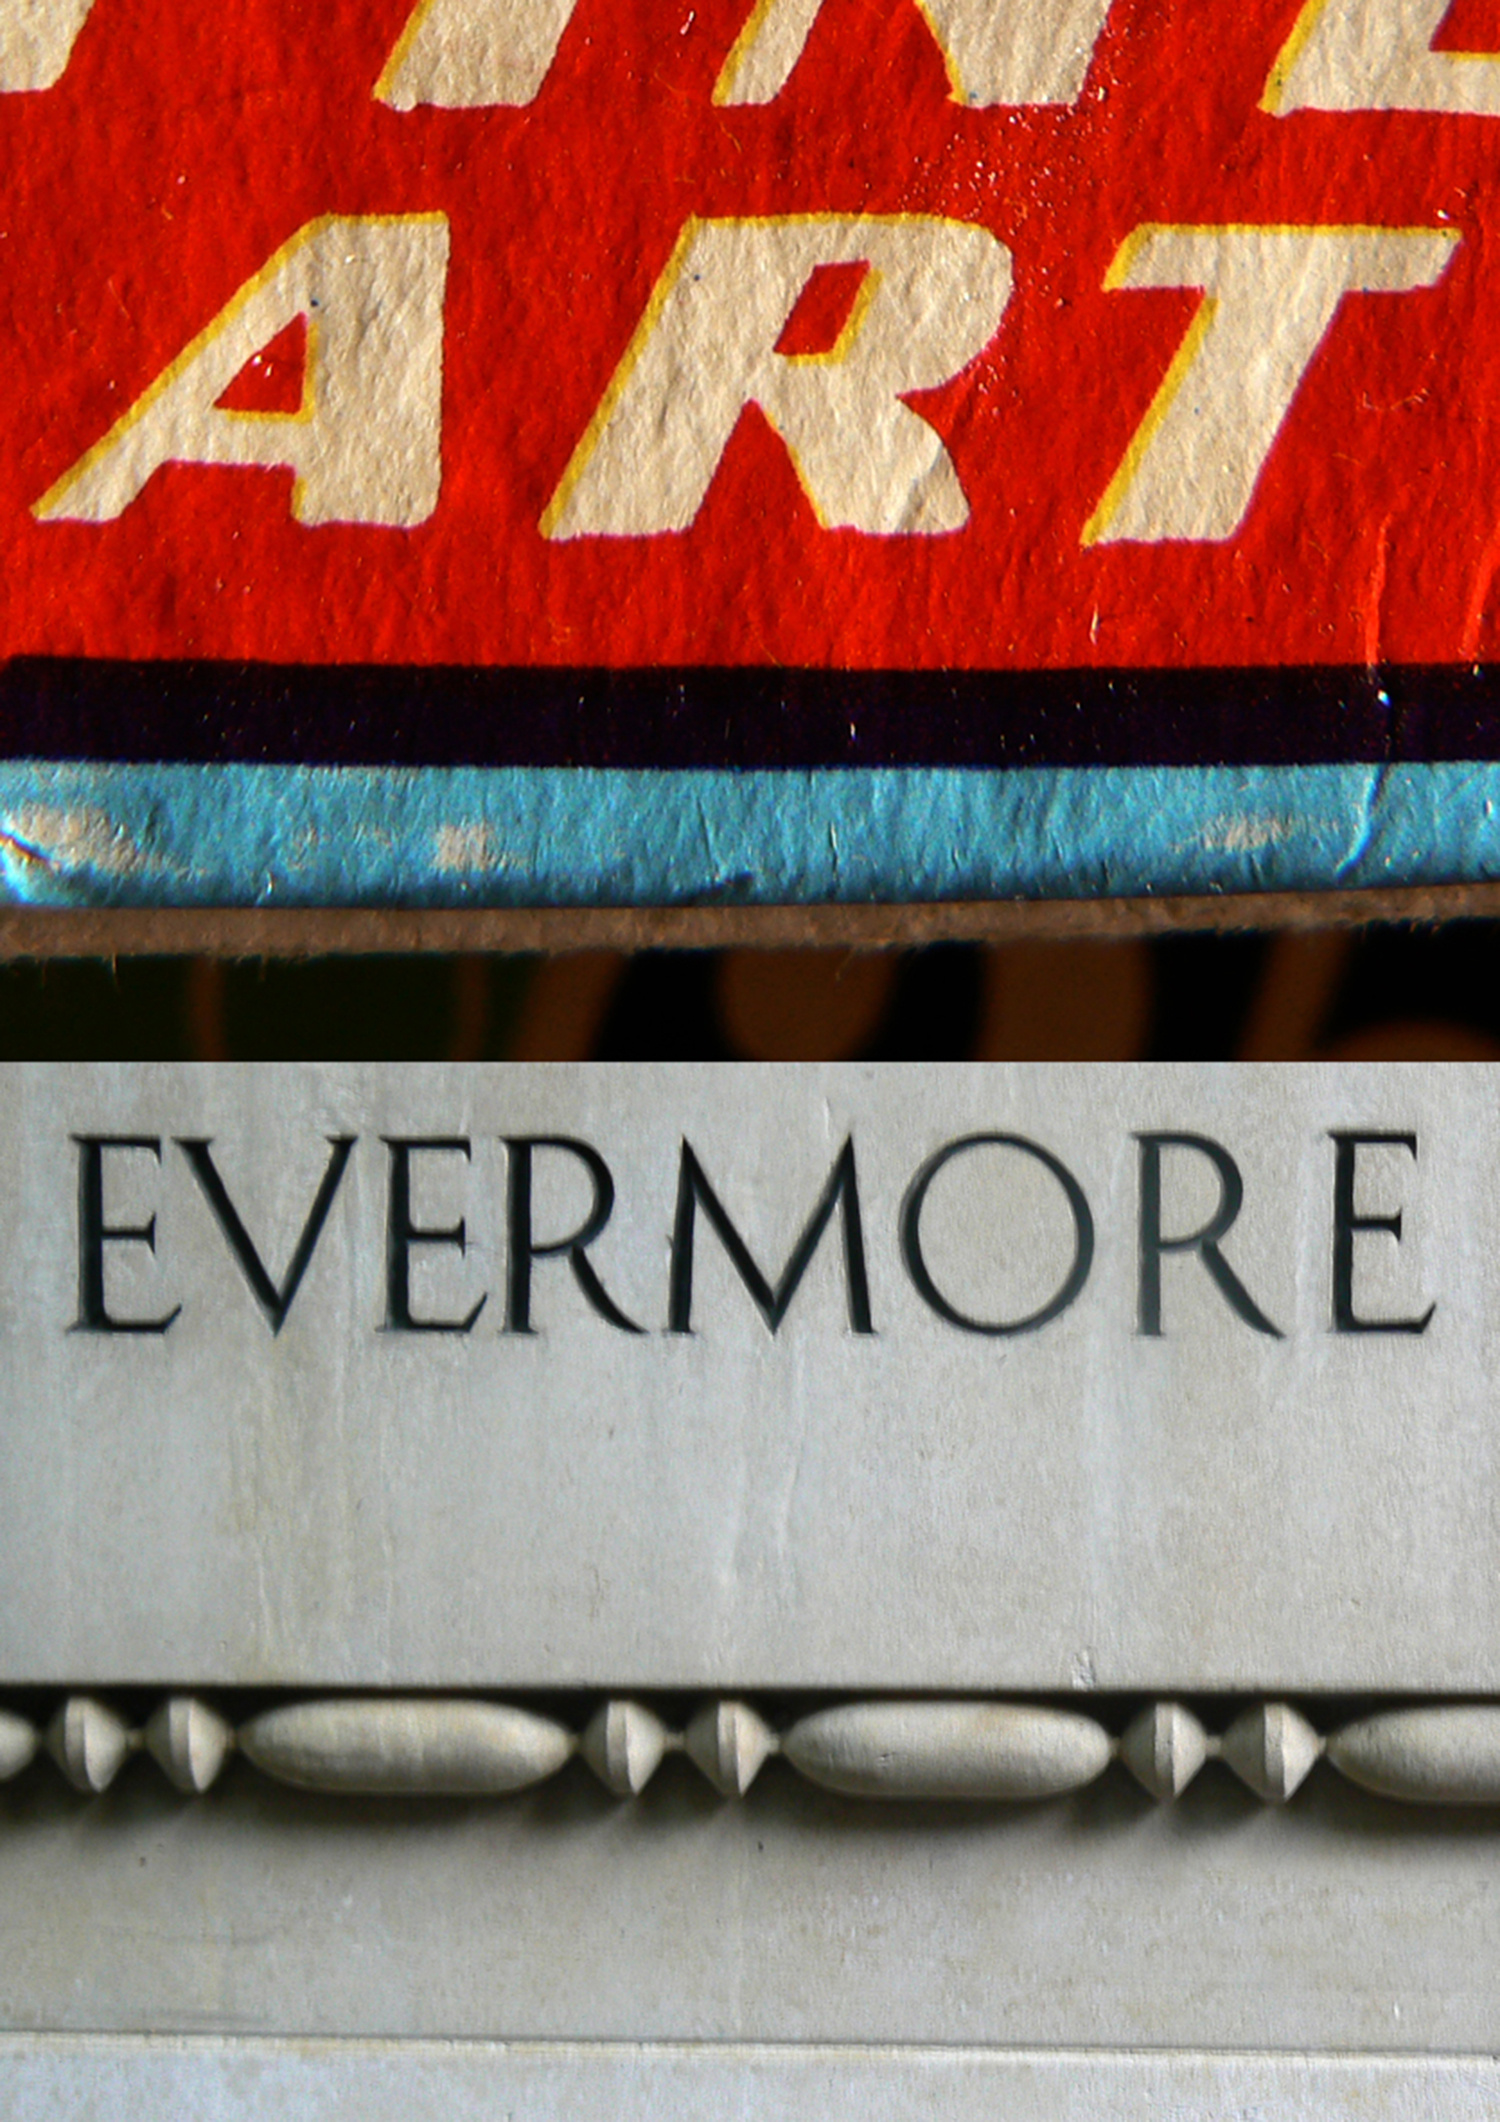 Art Evermore by Phil Gray